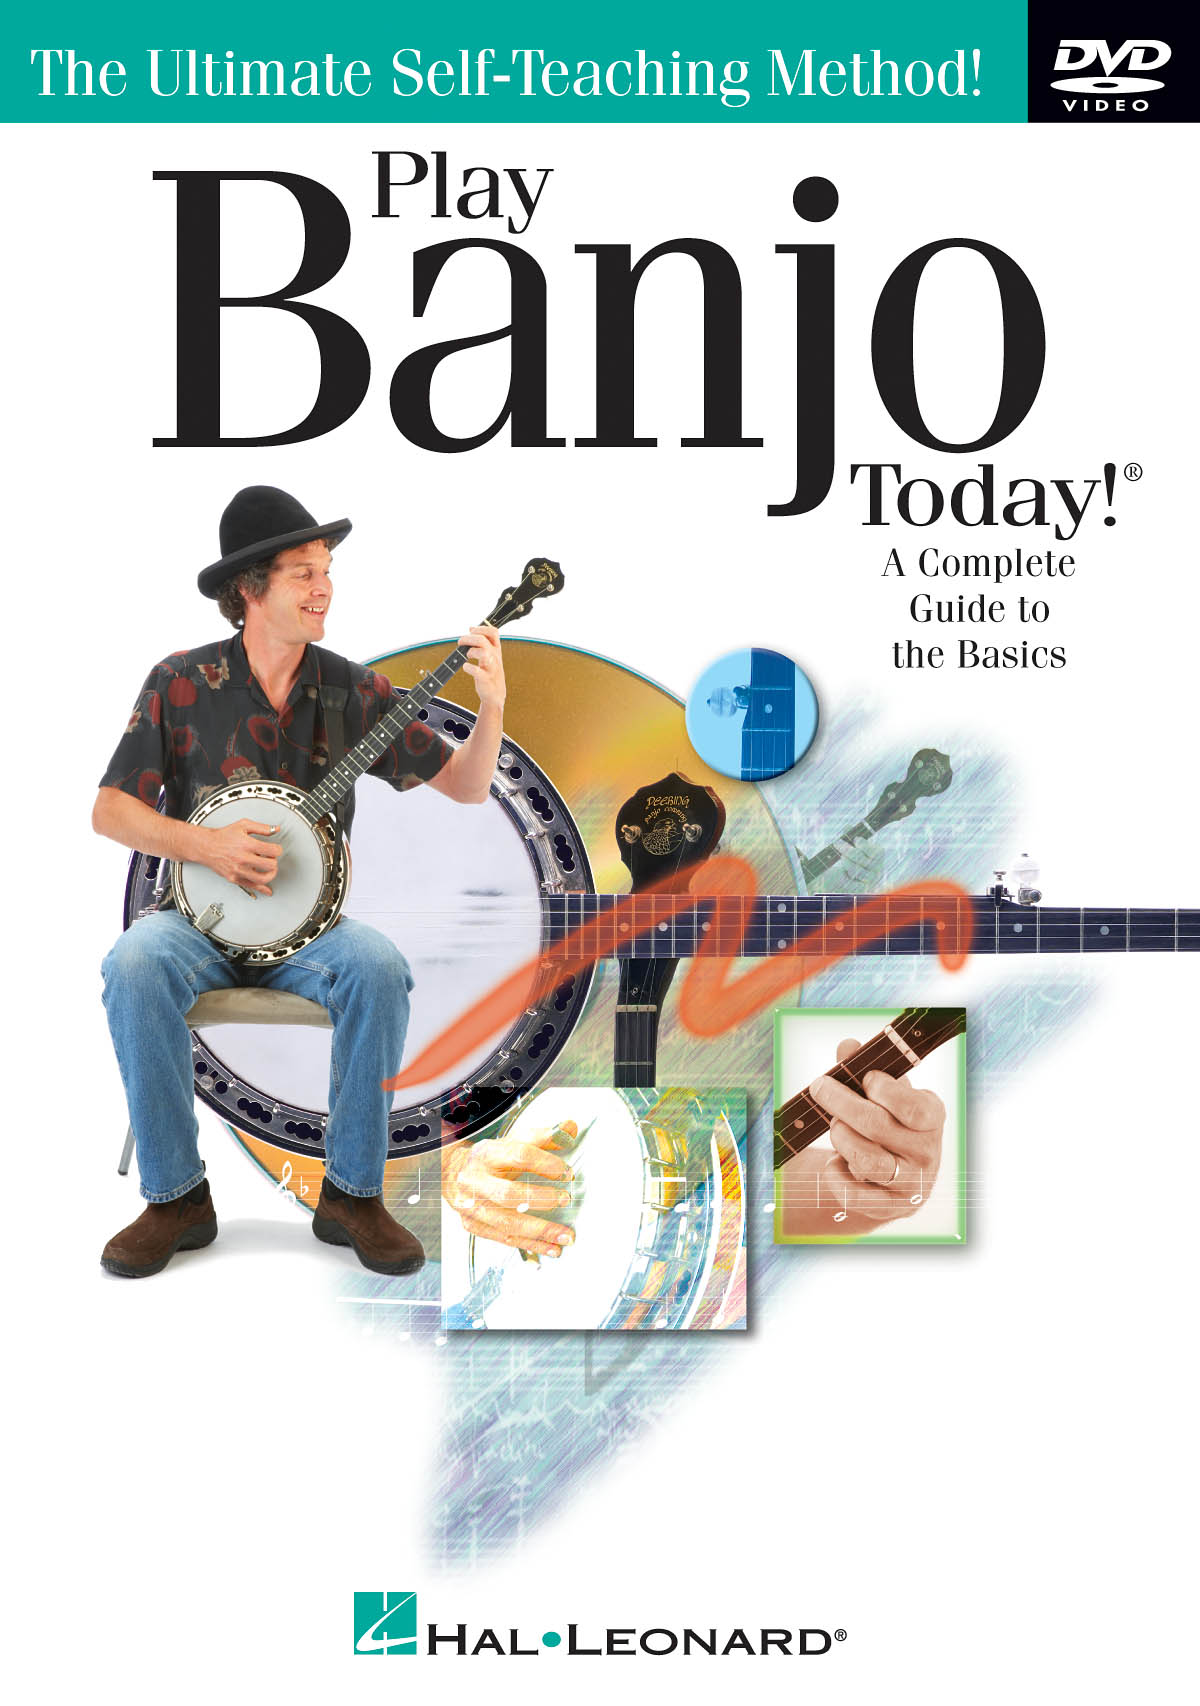 Play Banjo Today! - A Complete Guide to the Basics